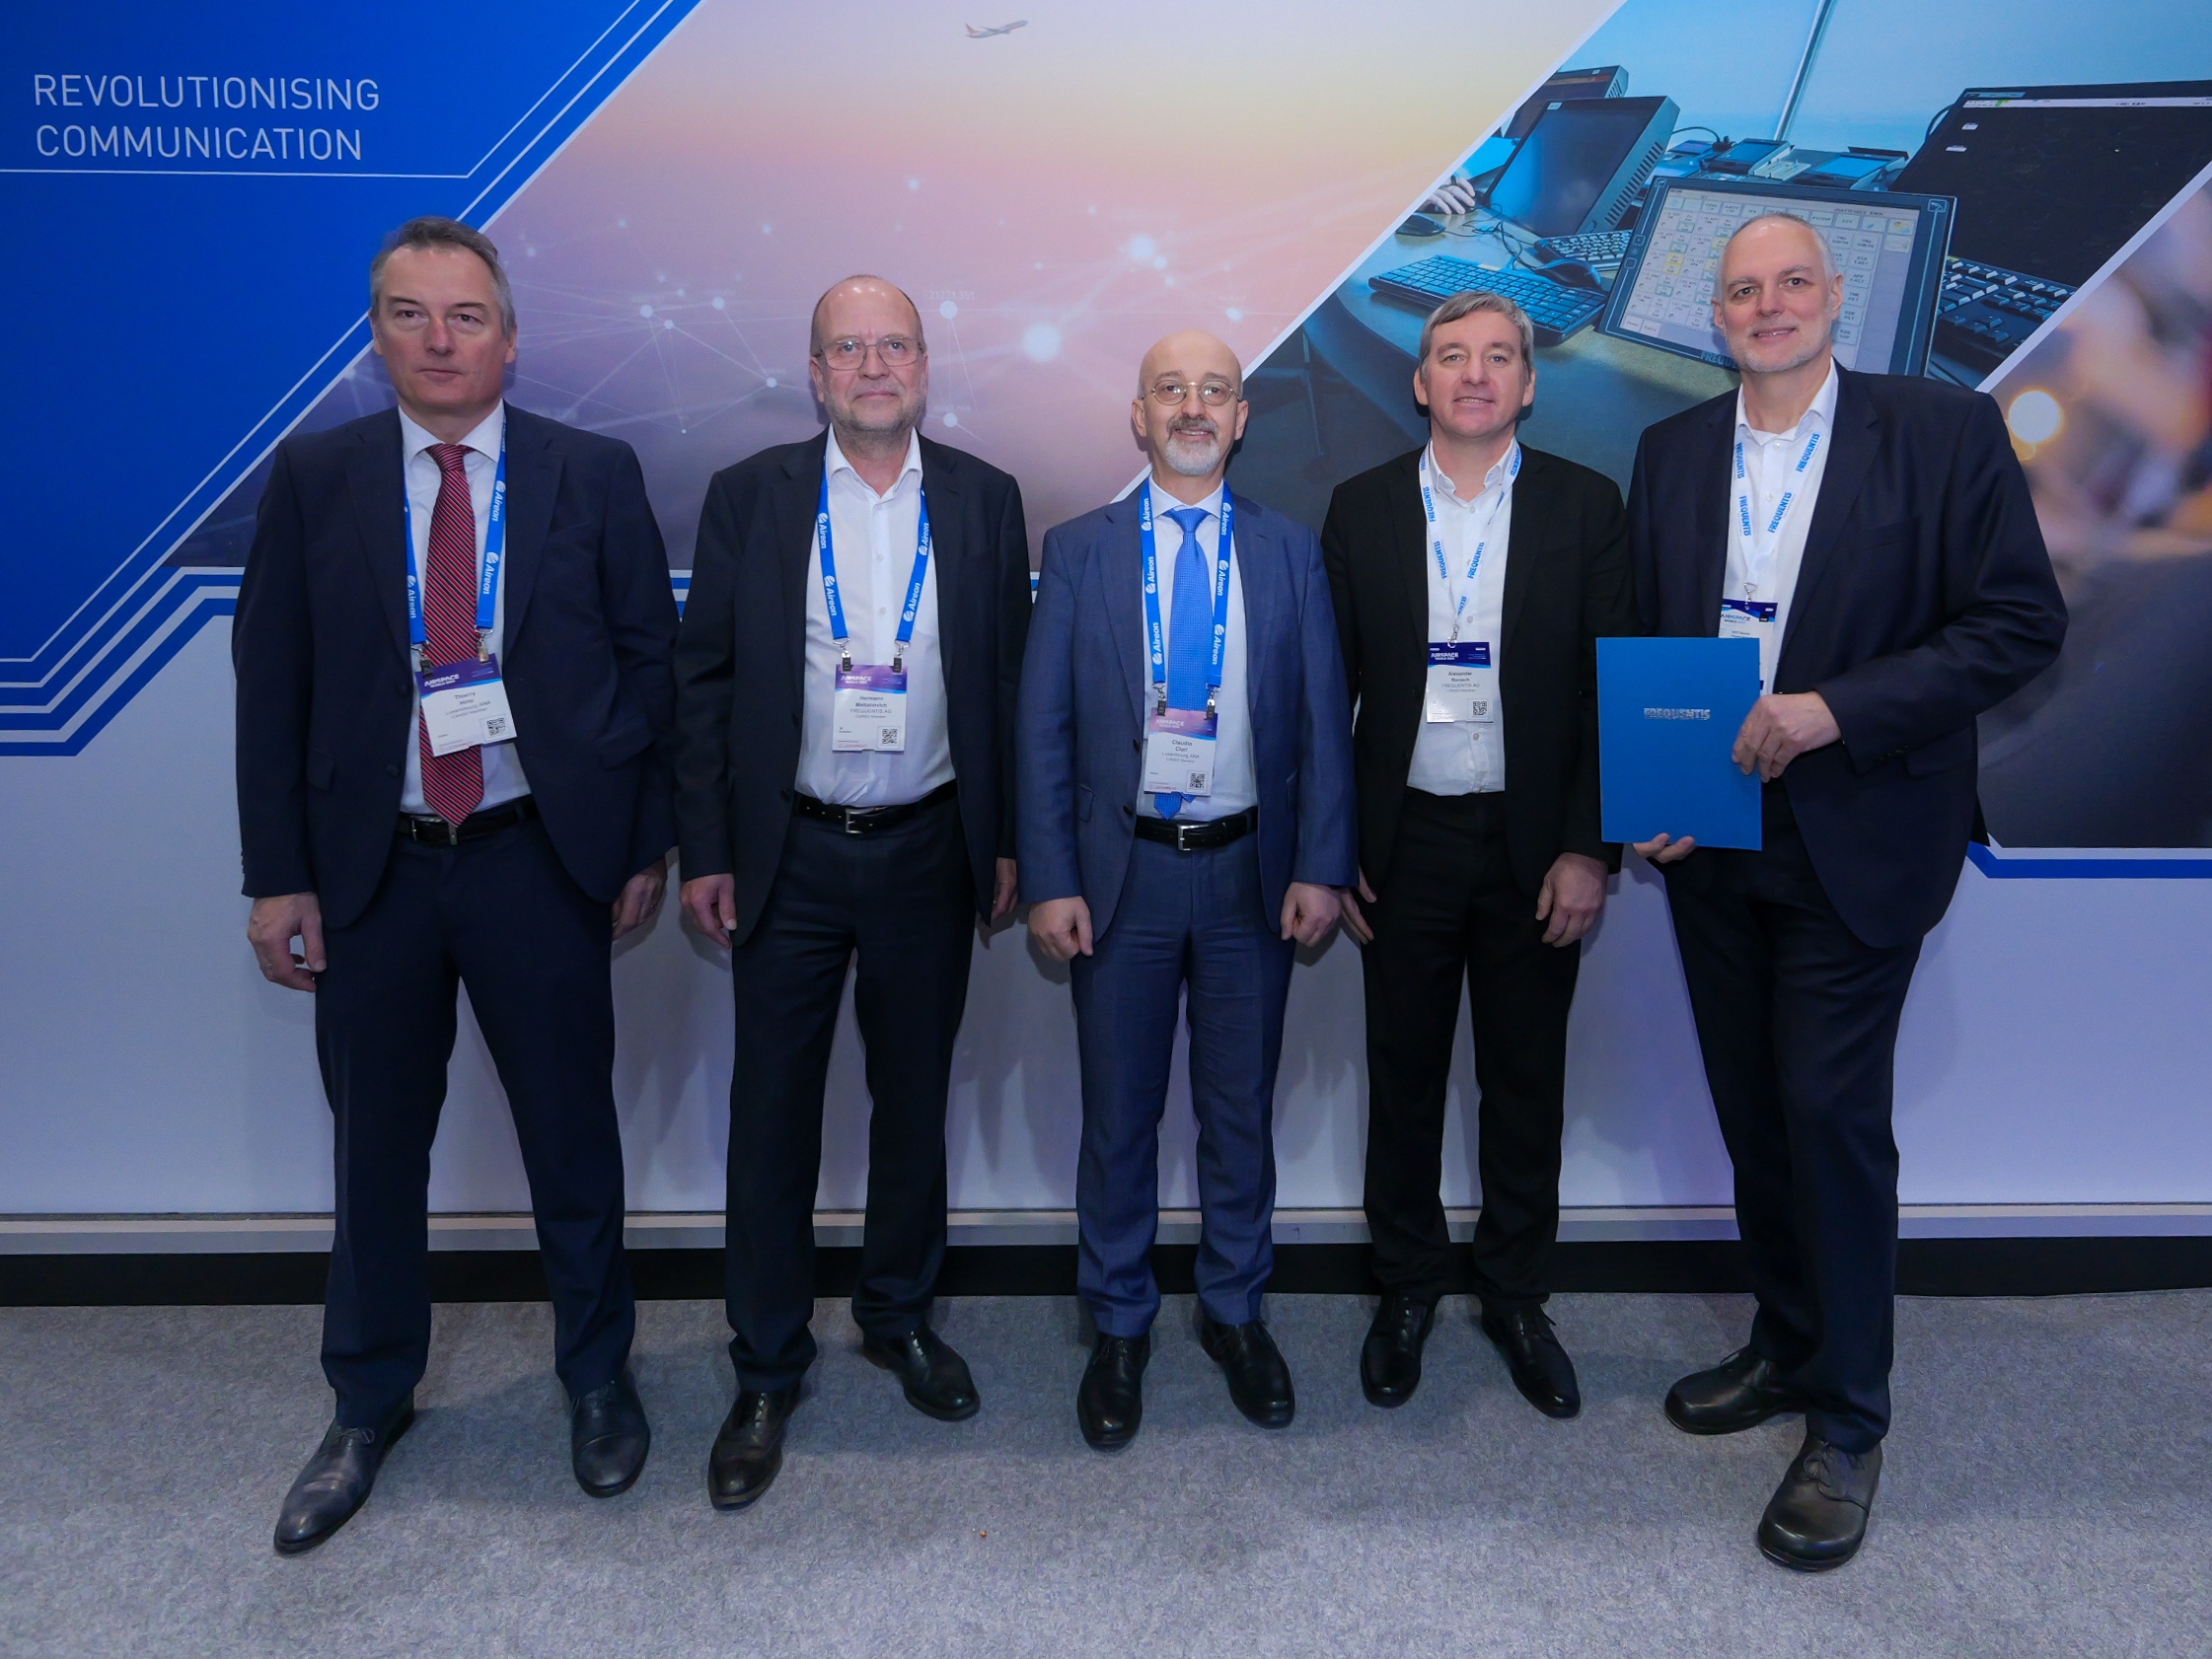 Thierry Hirtz, Head of Certification, Luxembourg ANA, Herman Mattanovich, CTO Frequentis; Claudio Clori-Fugazza CEO Luxembourg ANA; Alex Ronach, Sales Central Europe, Frequentis; Gerald Mohnl, Director ATM Communication; © Frequentis